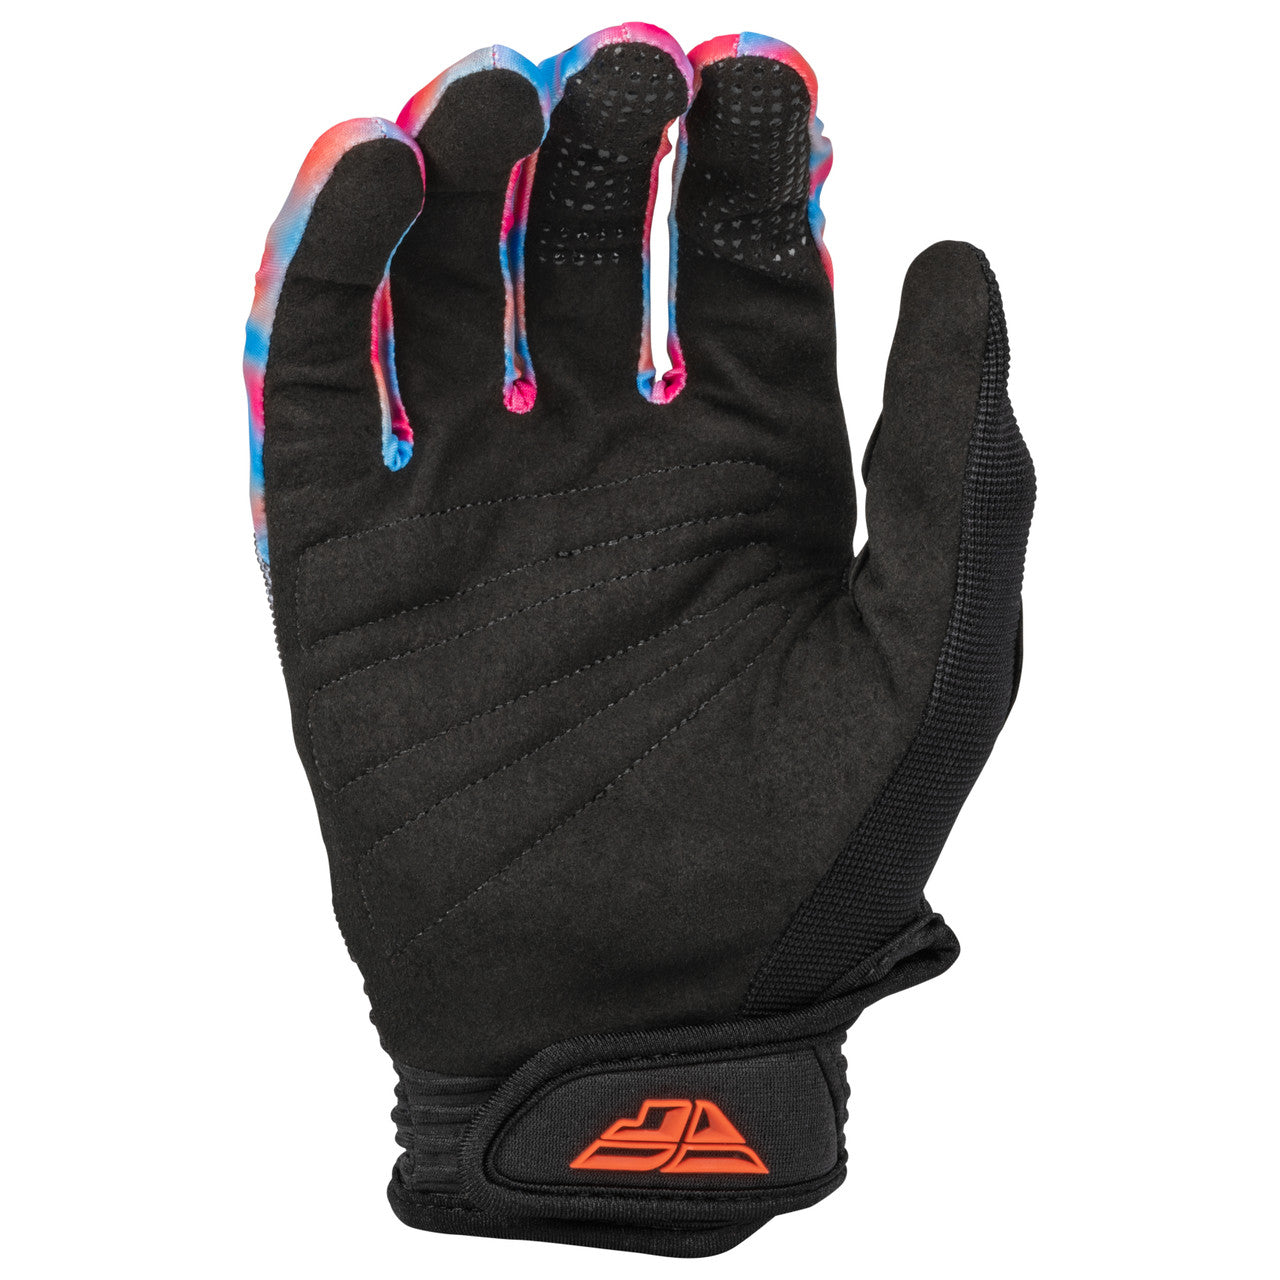 Fly F-16 YOUTH MX Gloves Grey/Pink/Blue